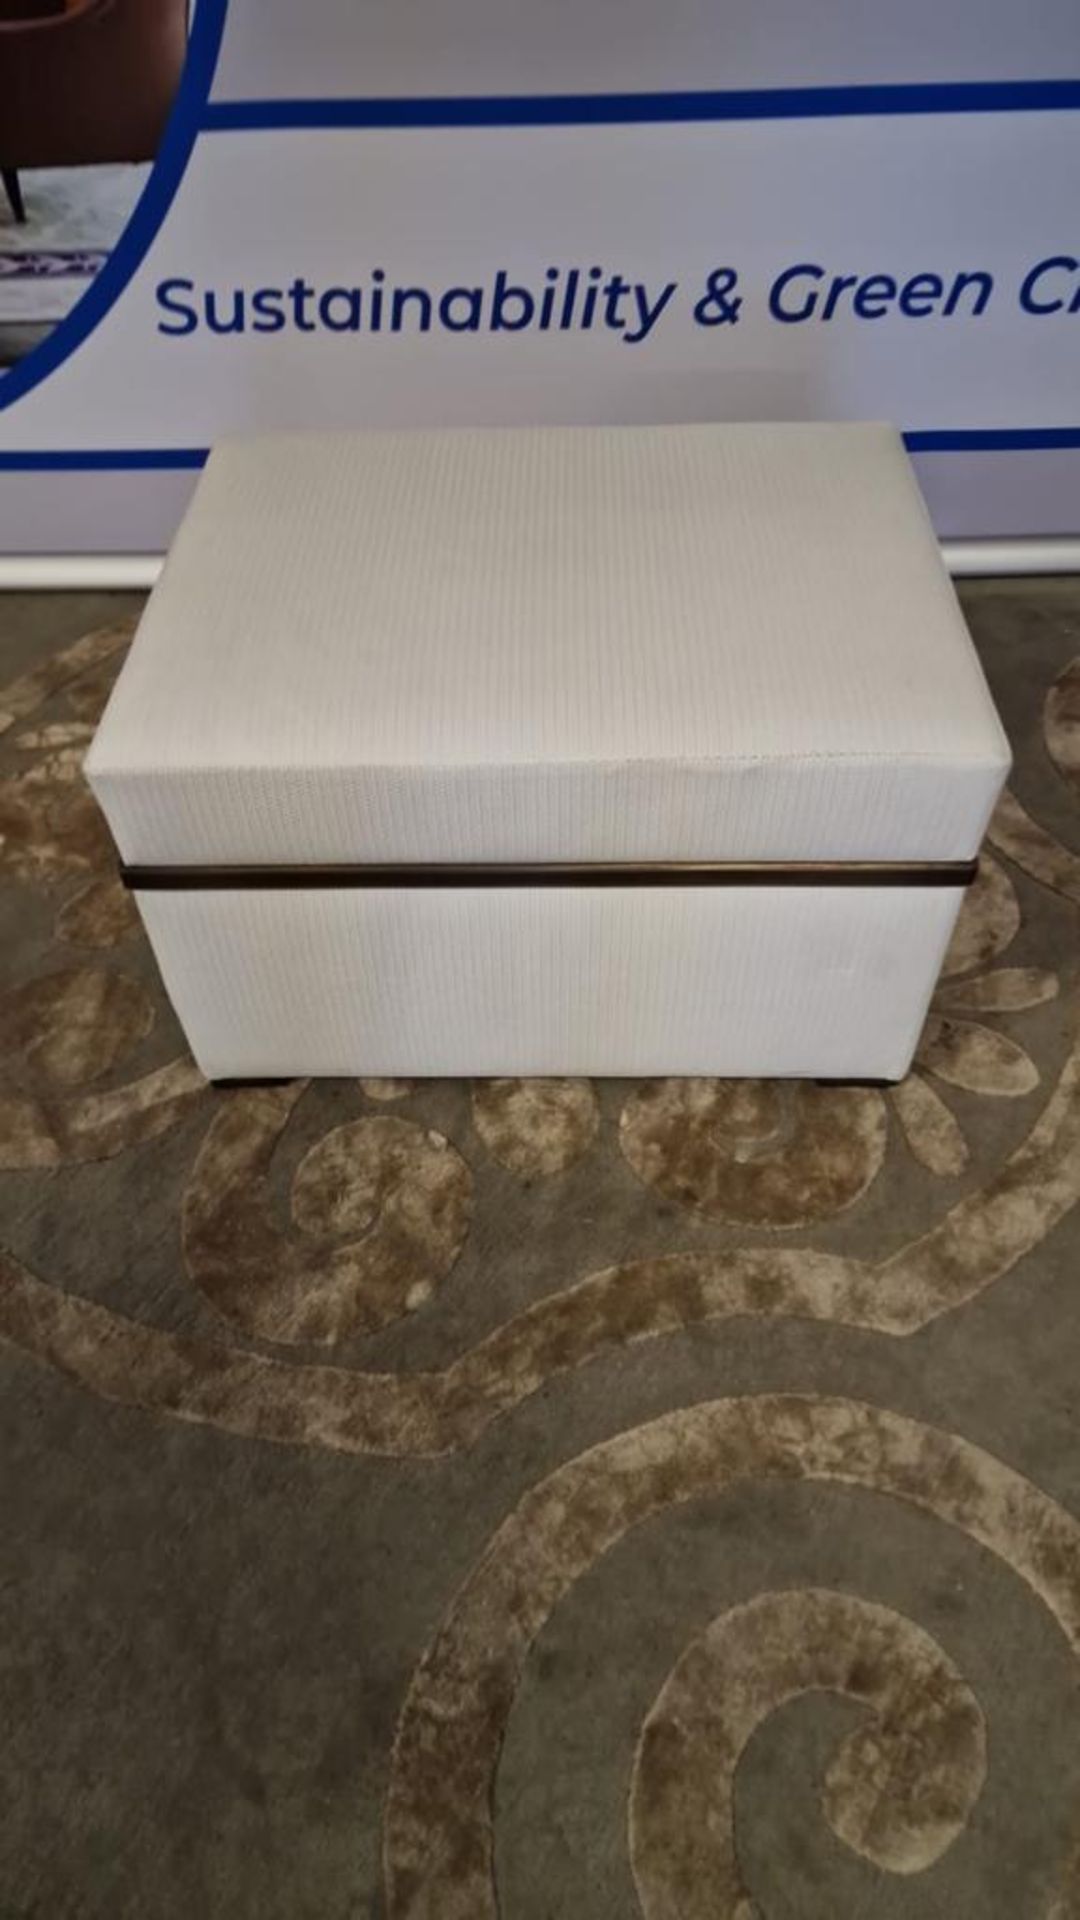 A bespoke ottoman made by George Smith Ltd in a cream patterned fabric with bronze strap details and